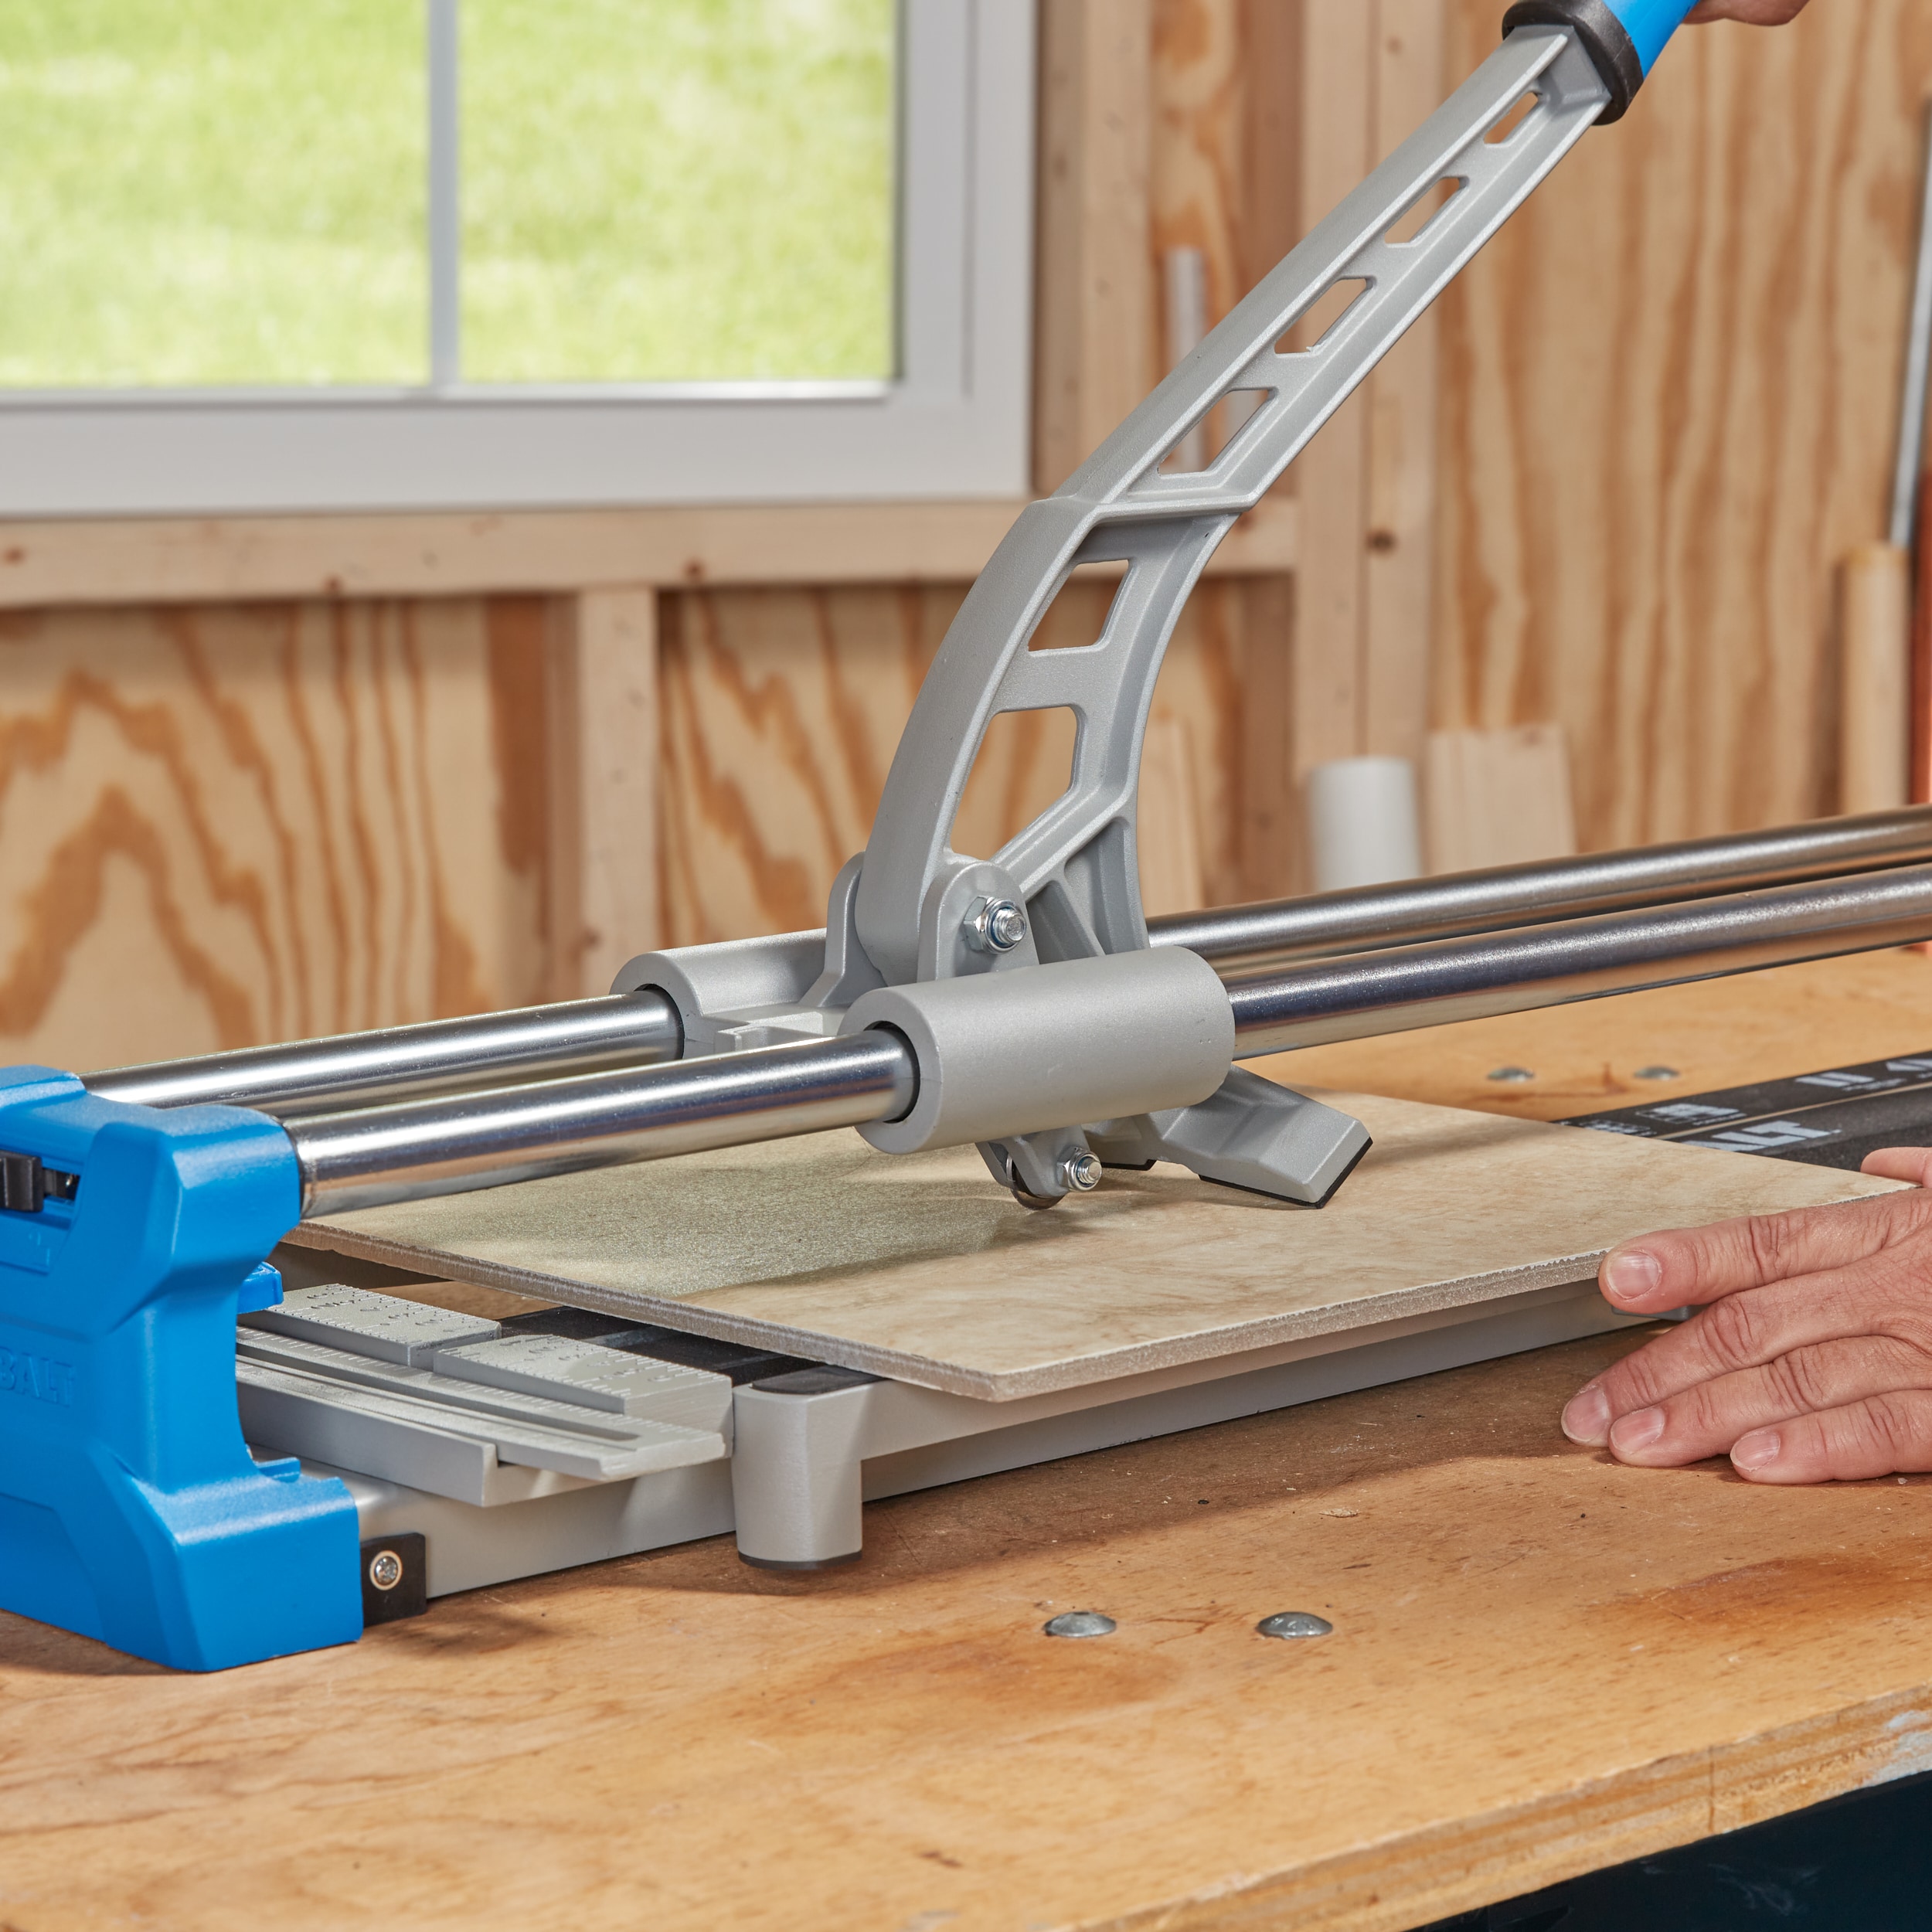 Project Source 14-in Ceramic Tile Cutter Kit | 67820